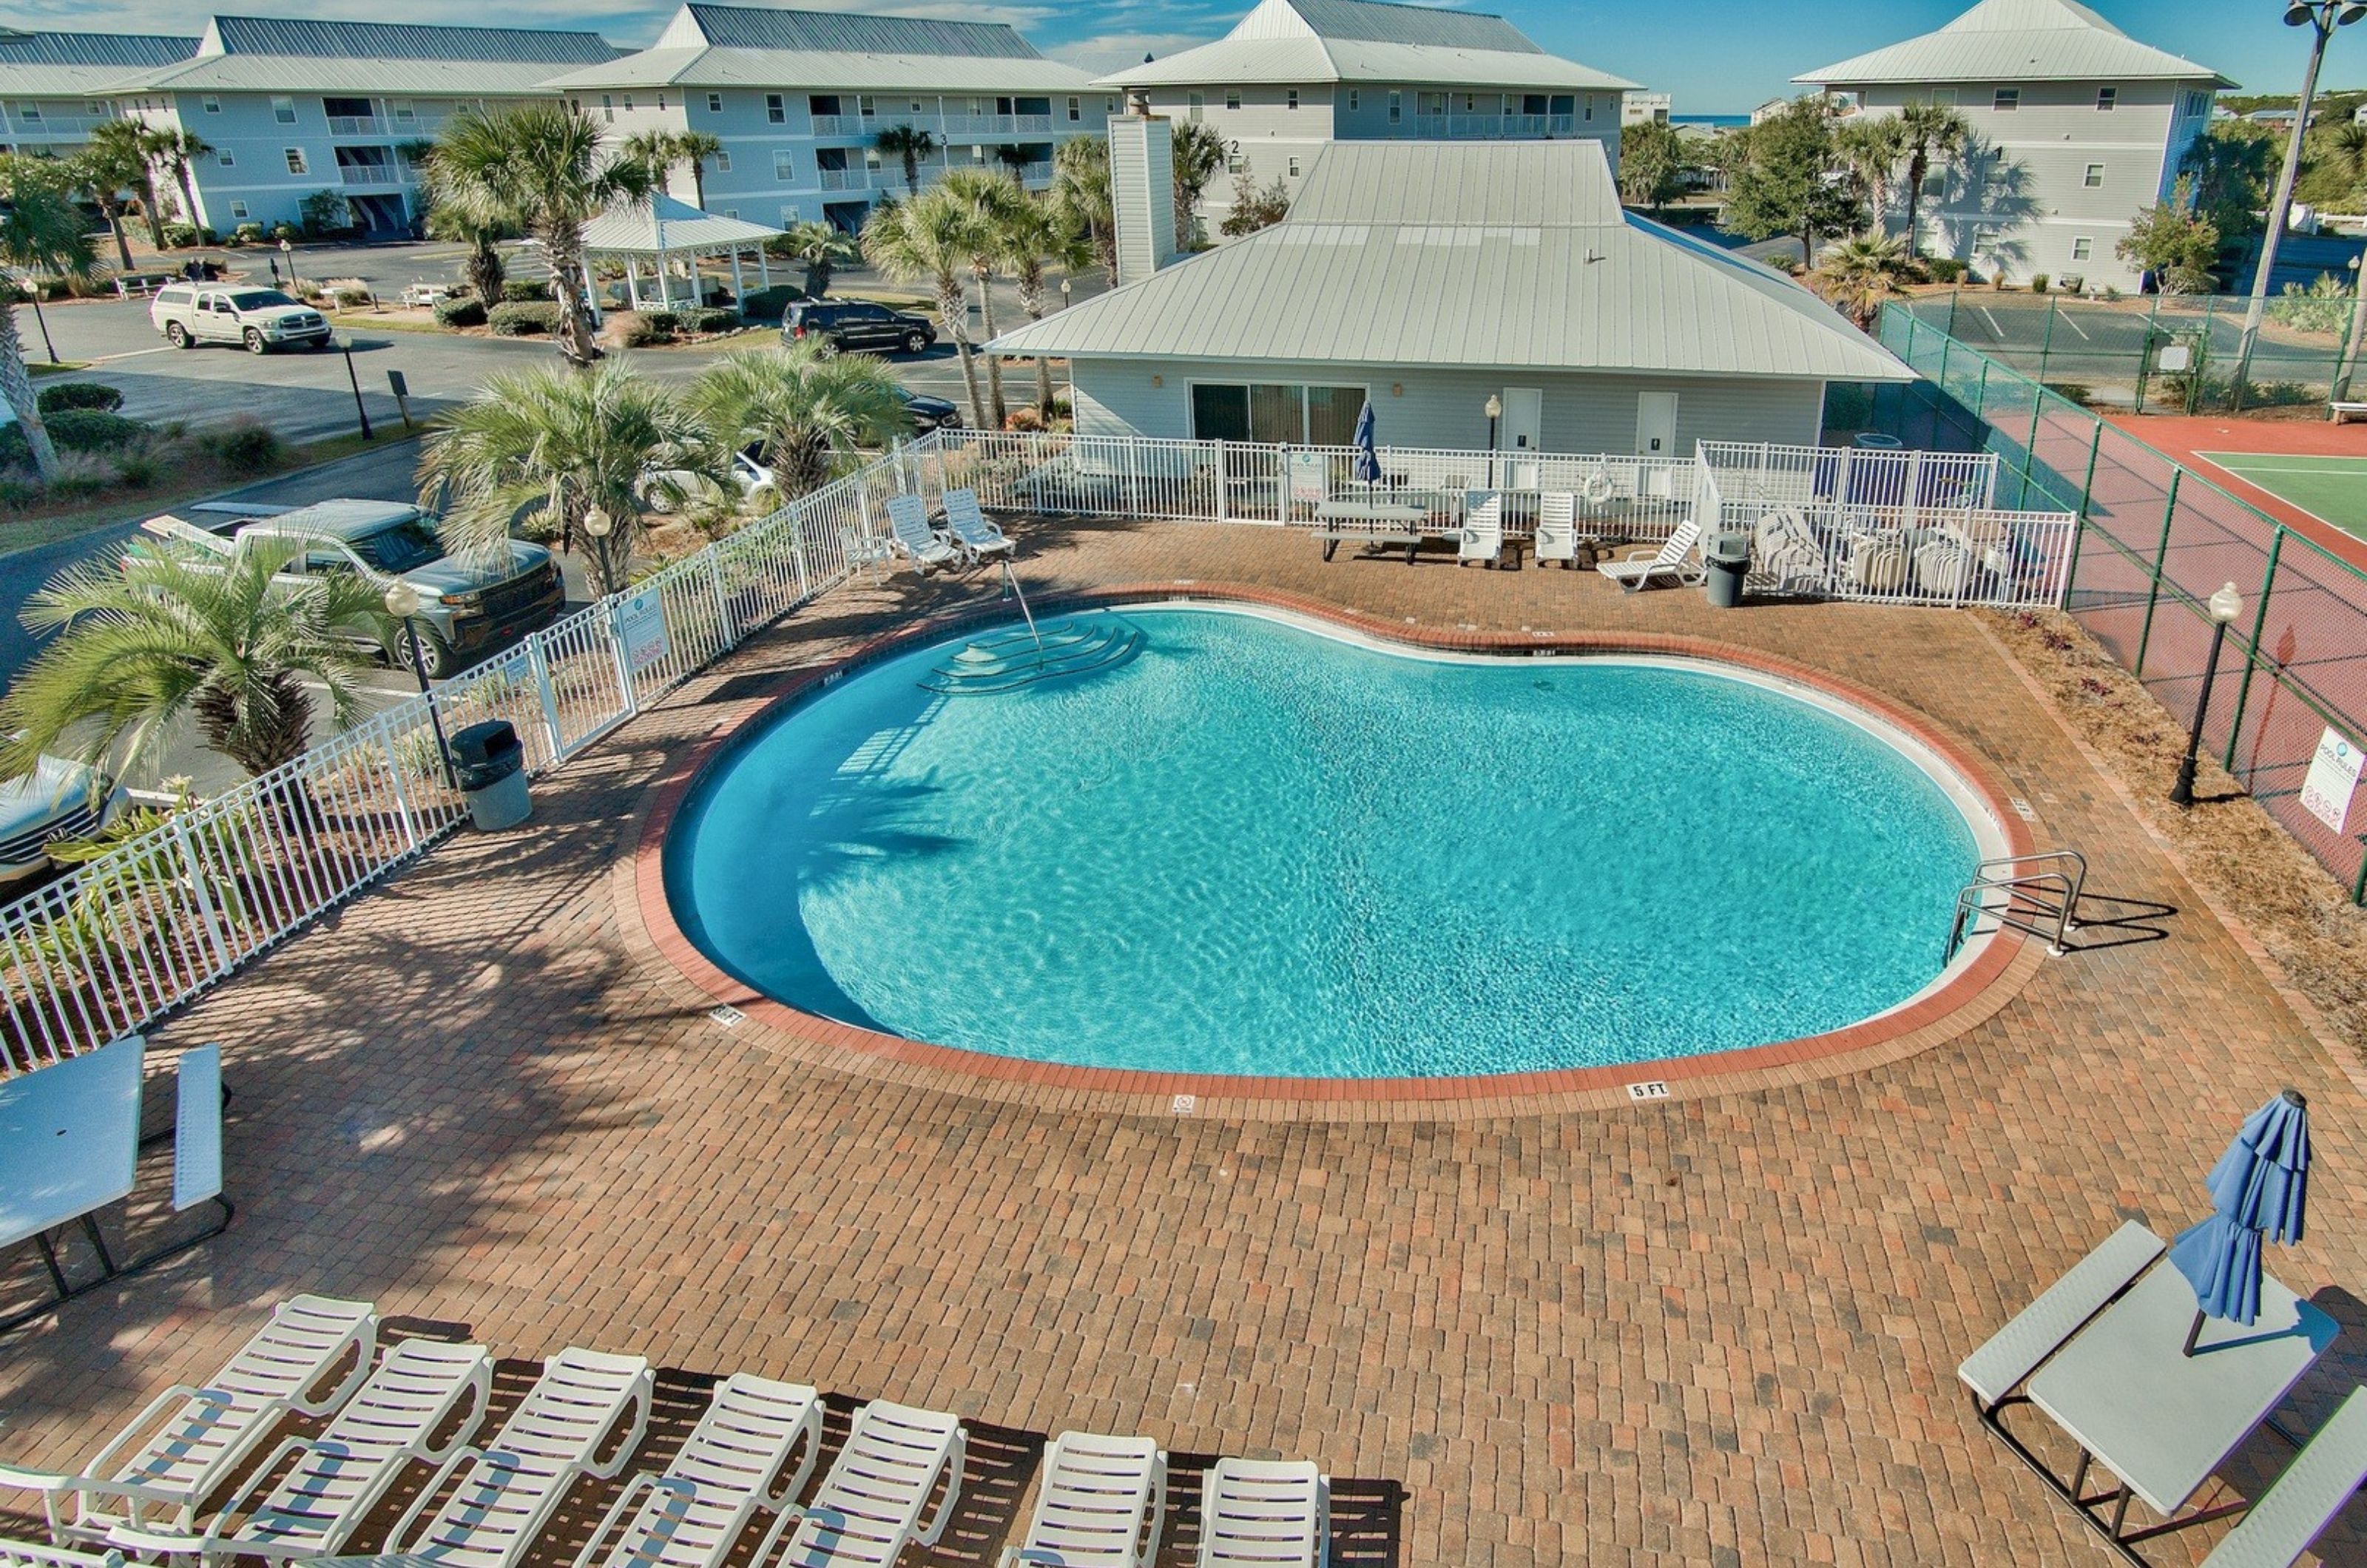 One of the outdoor pools and pool deck at Beachside Villas in Seagrove Beach Florida 